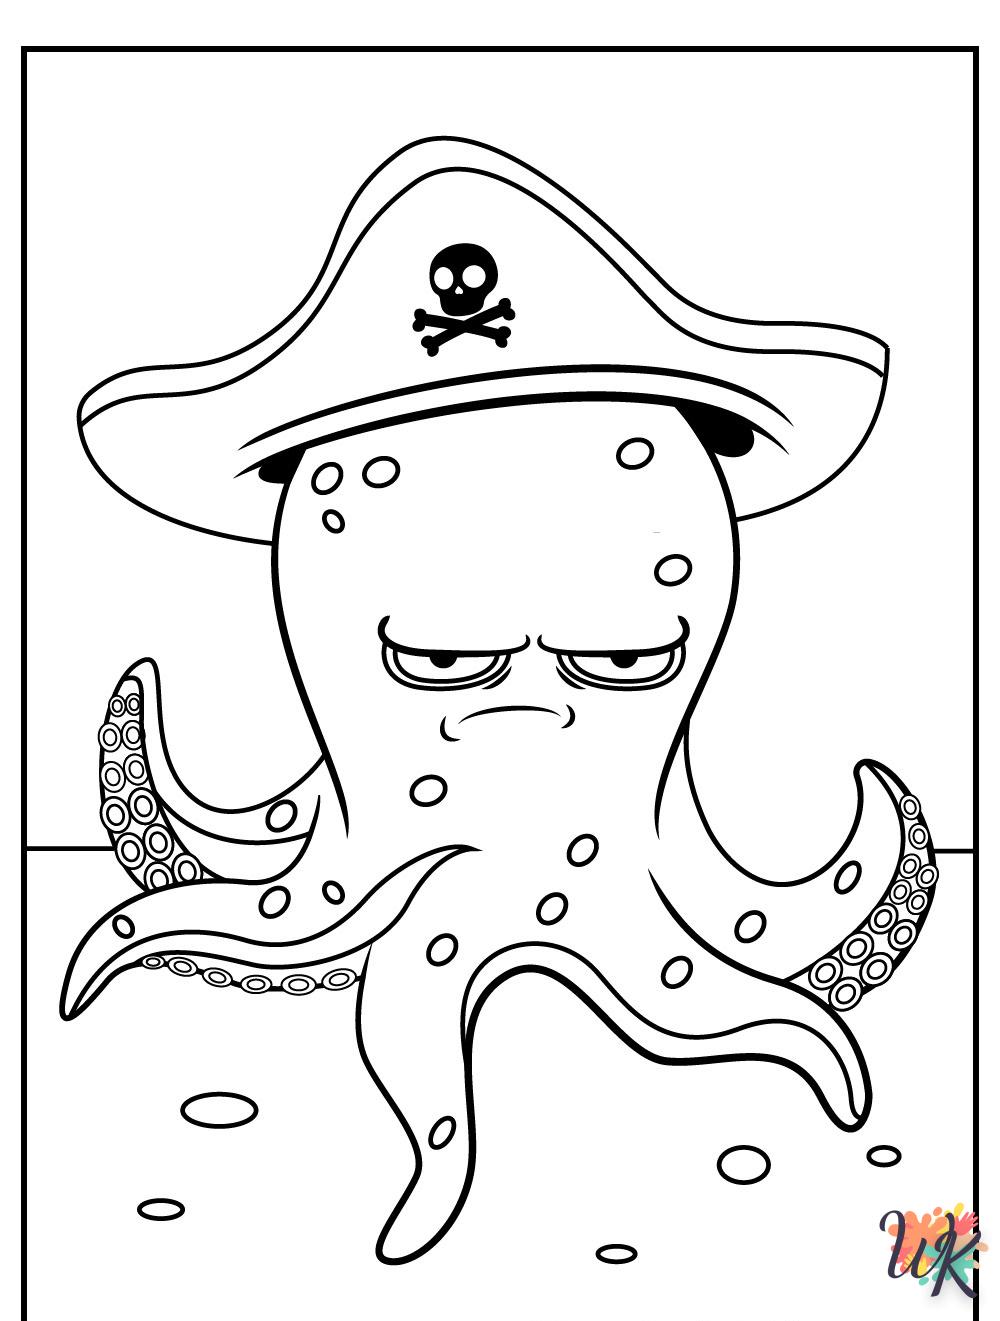 Octopus coloring page to print for 4 year olds 1